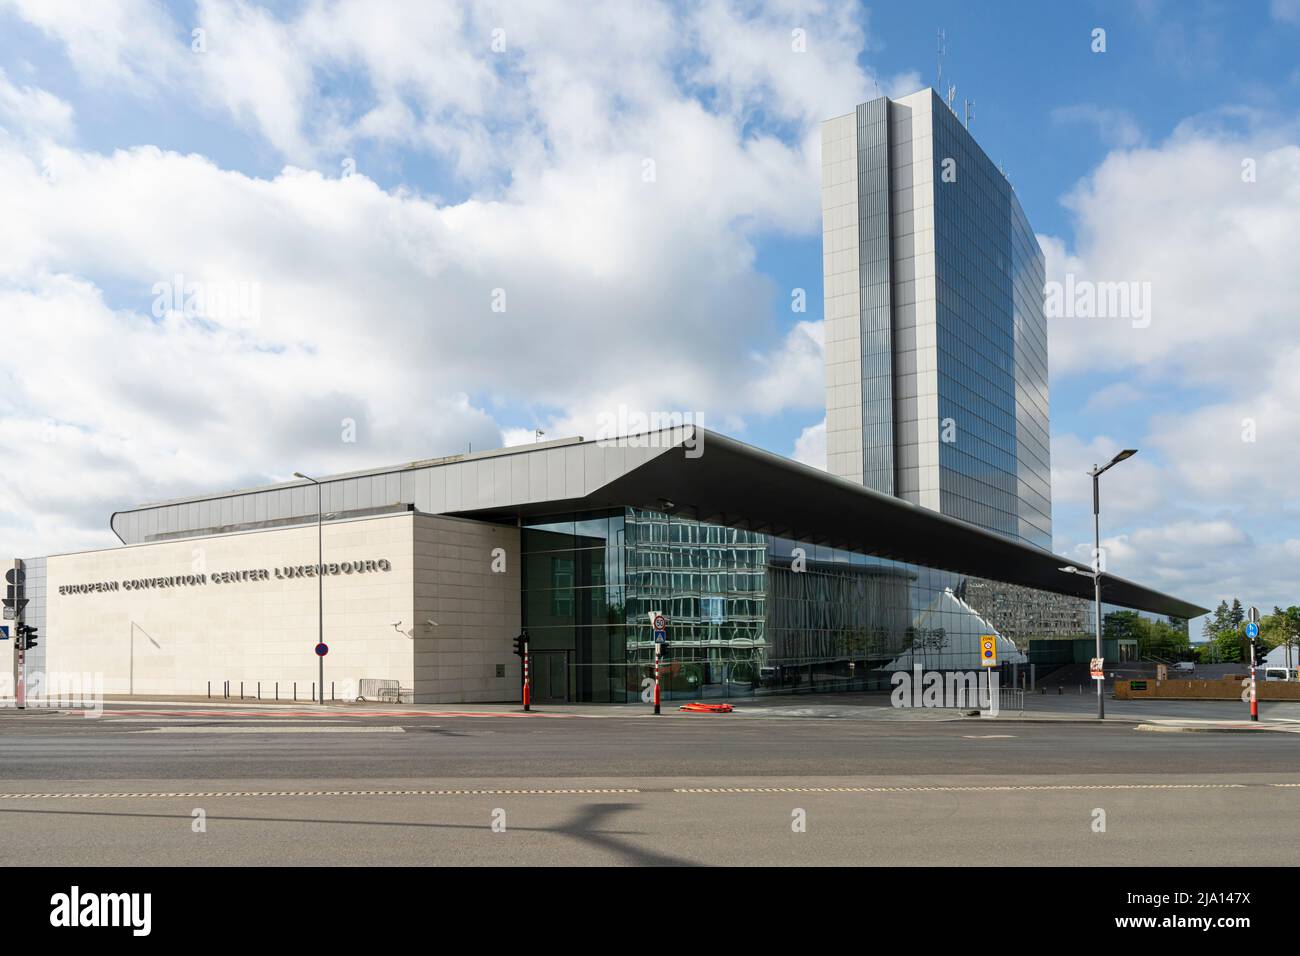 Luxembourg city, May 2022. External view of the European Convention Center in the city center Stock Photo